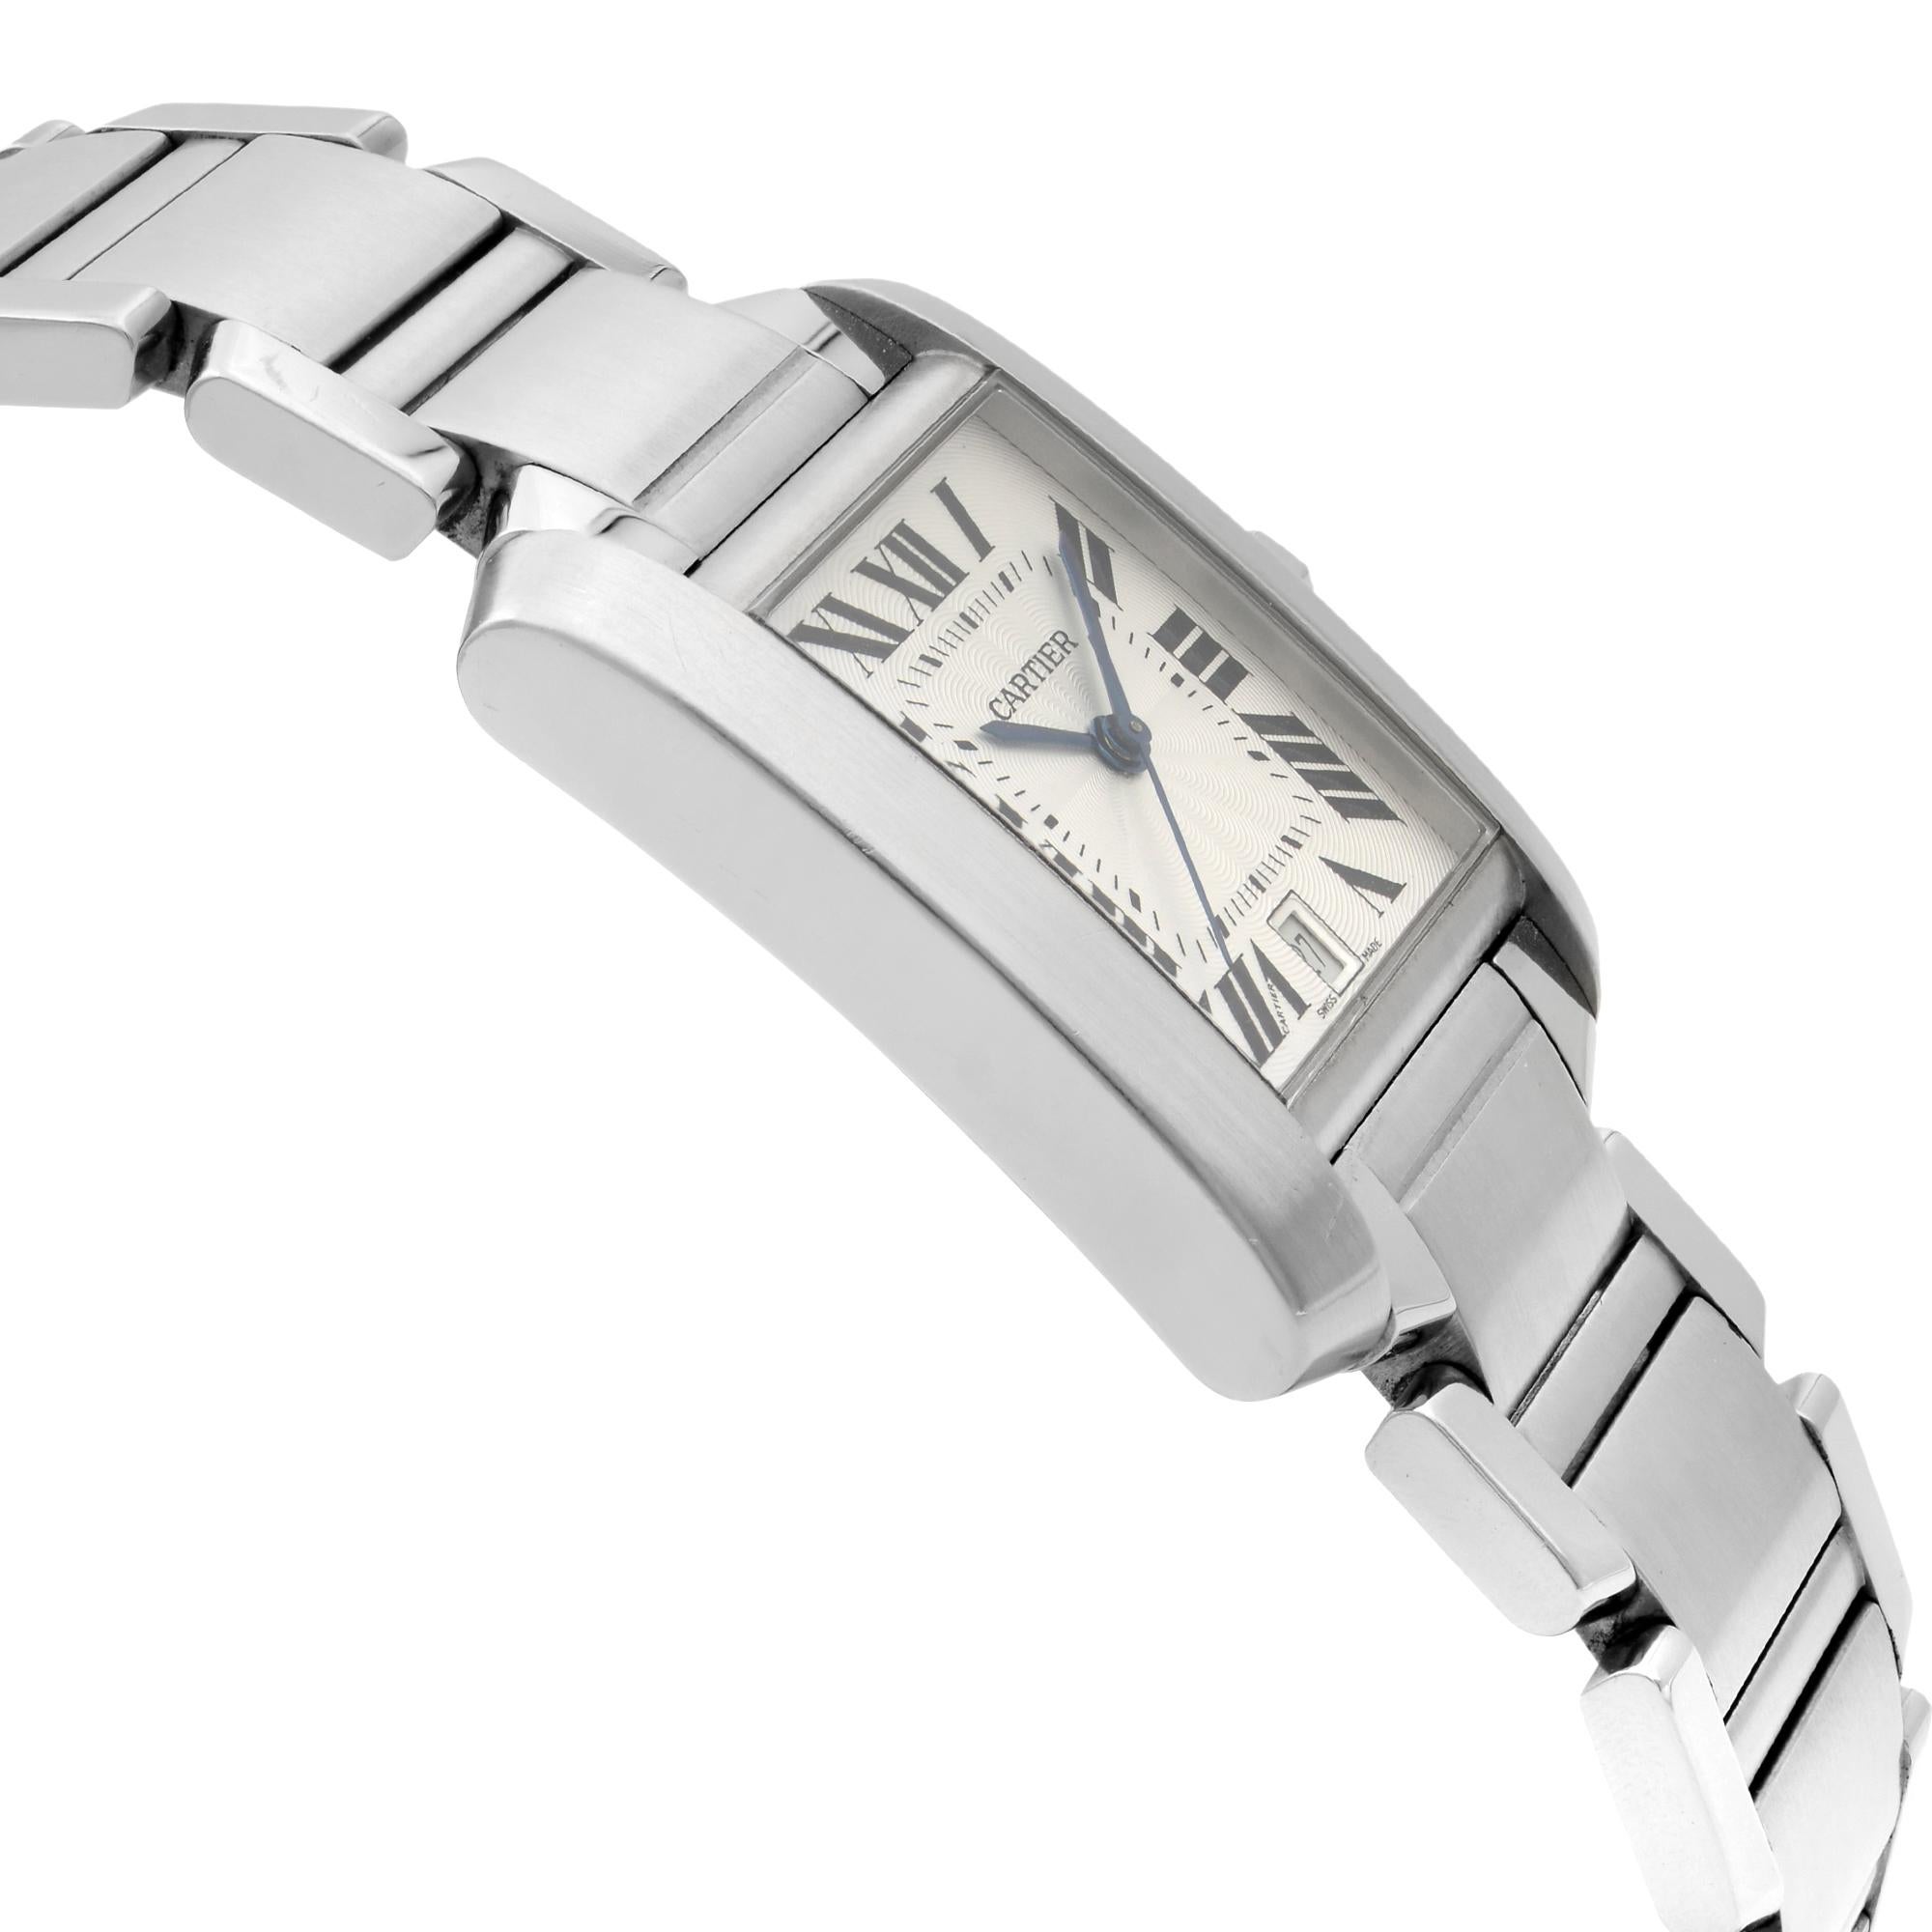 Cartier Tank Francaise 2302 Stainless Steel Silver Dial Men's Watch W51002Q3 1